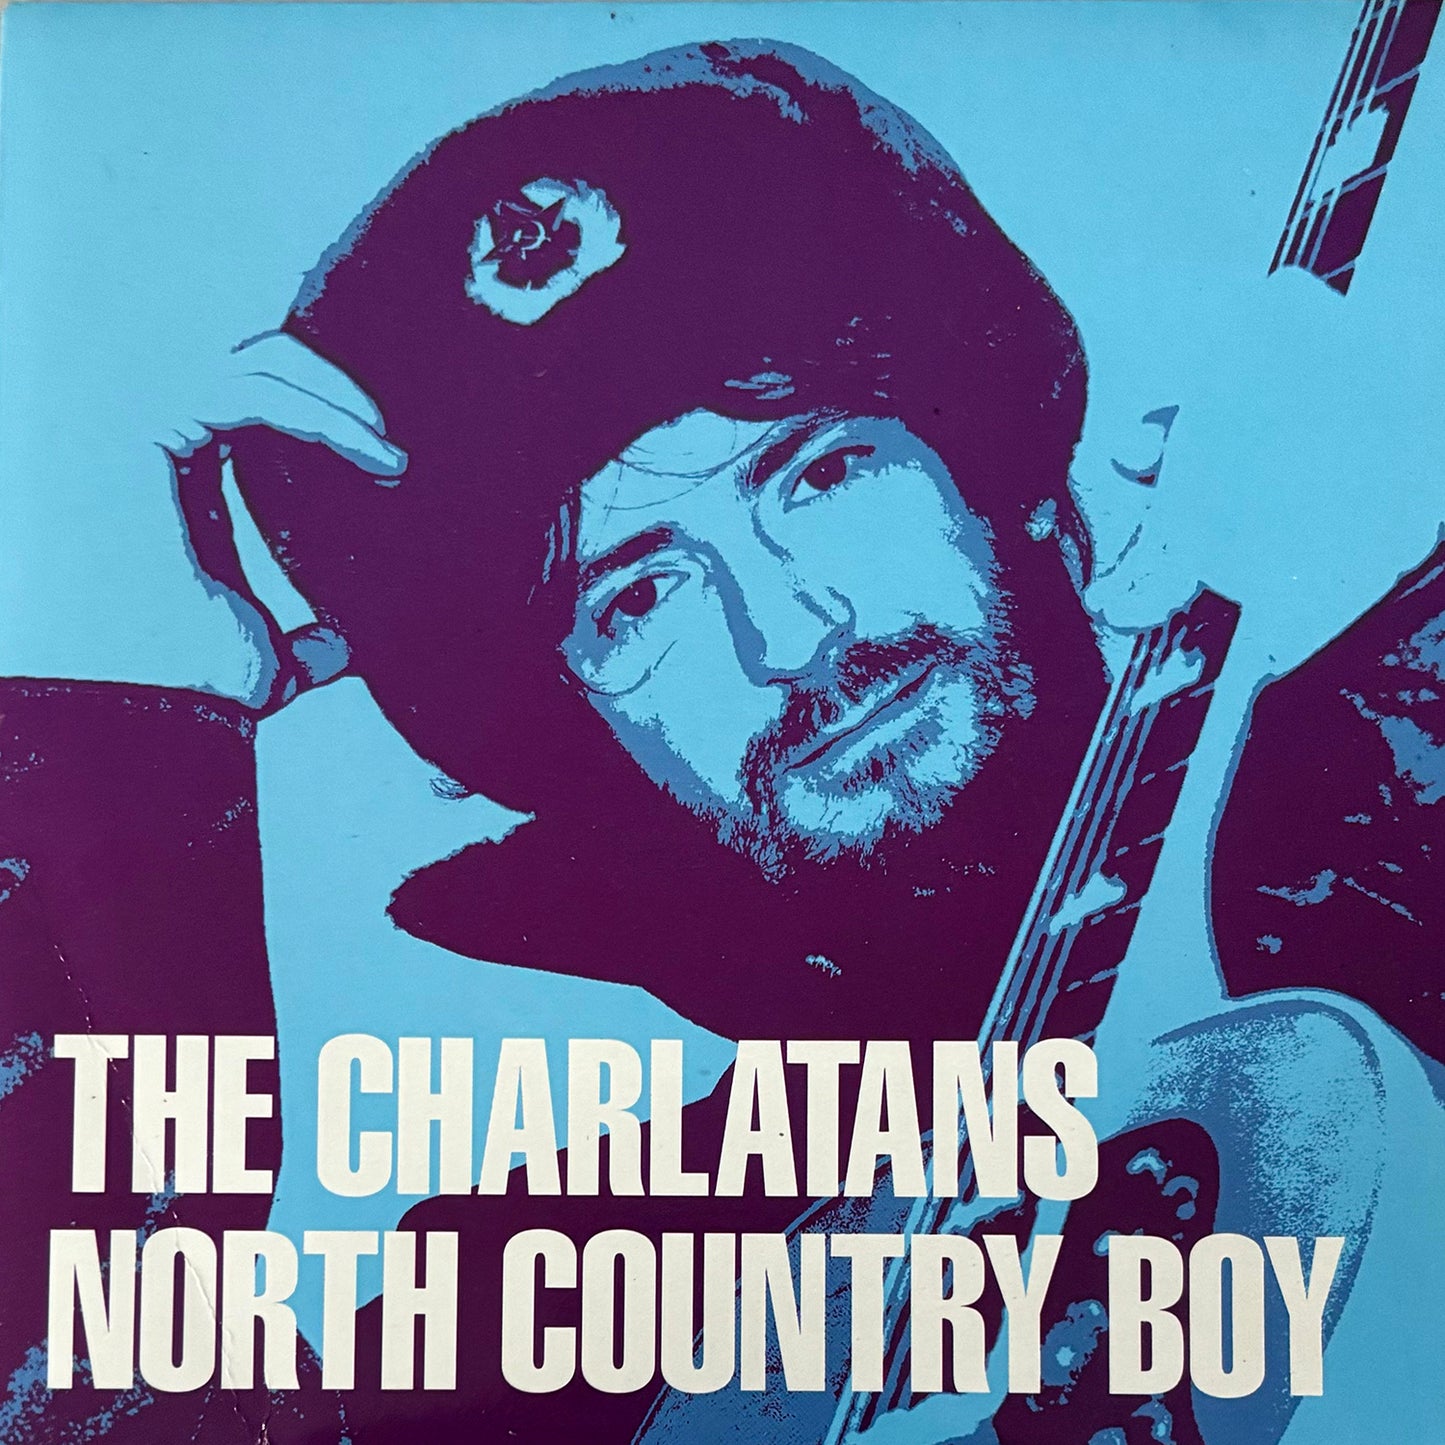 Charlatans - North Country Boy / Area 51 7" (VG+ / VG+)